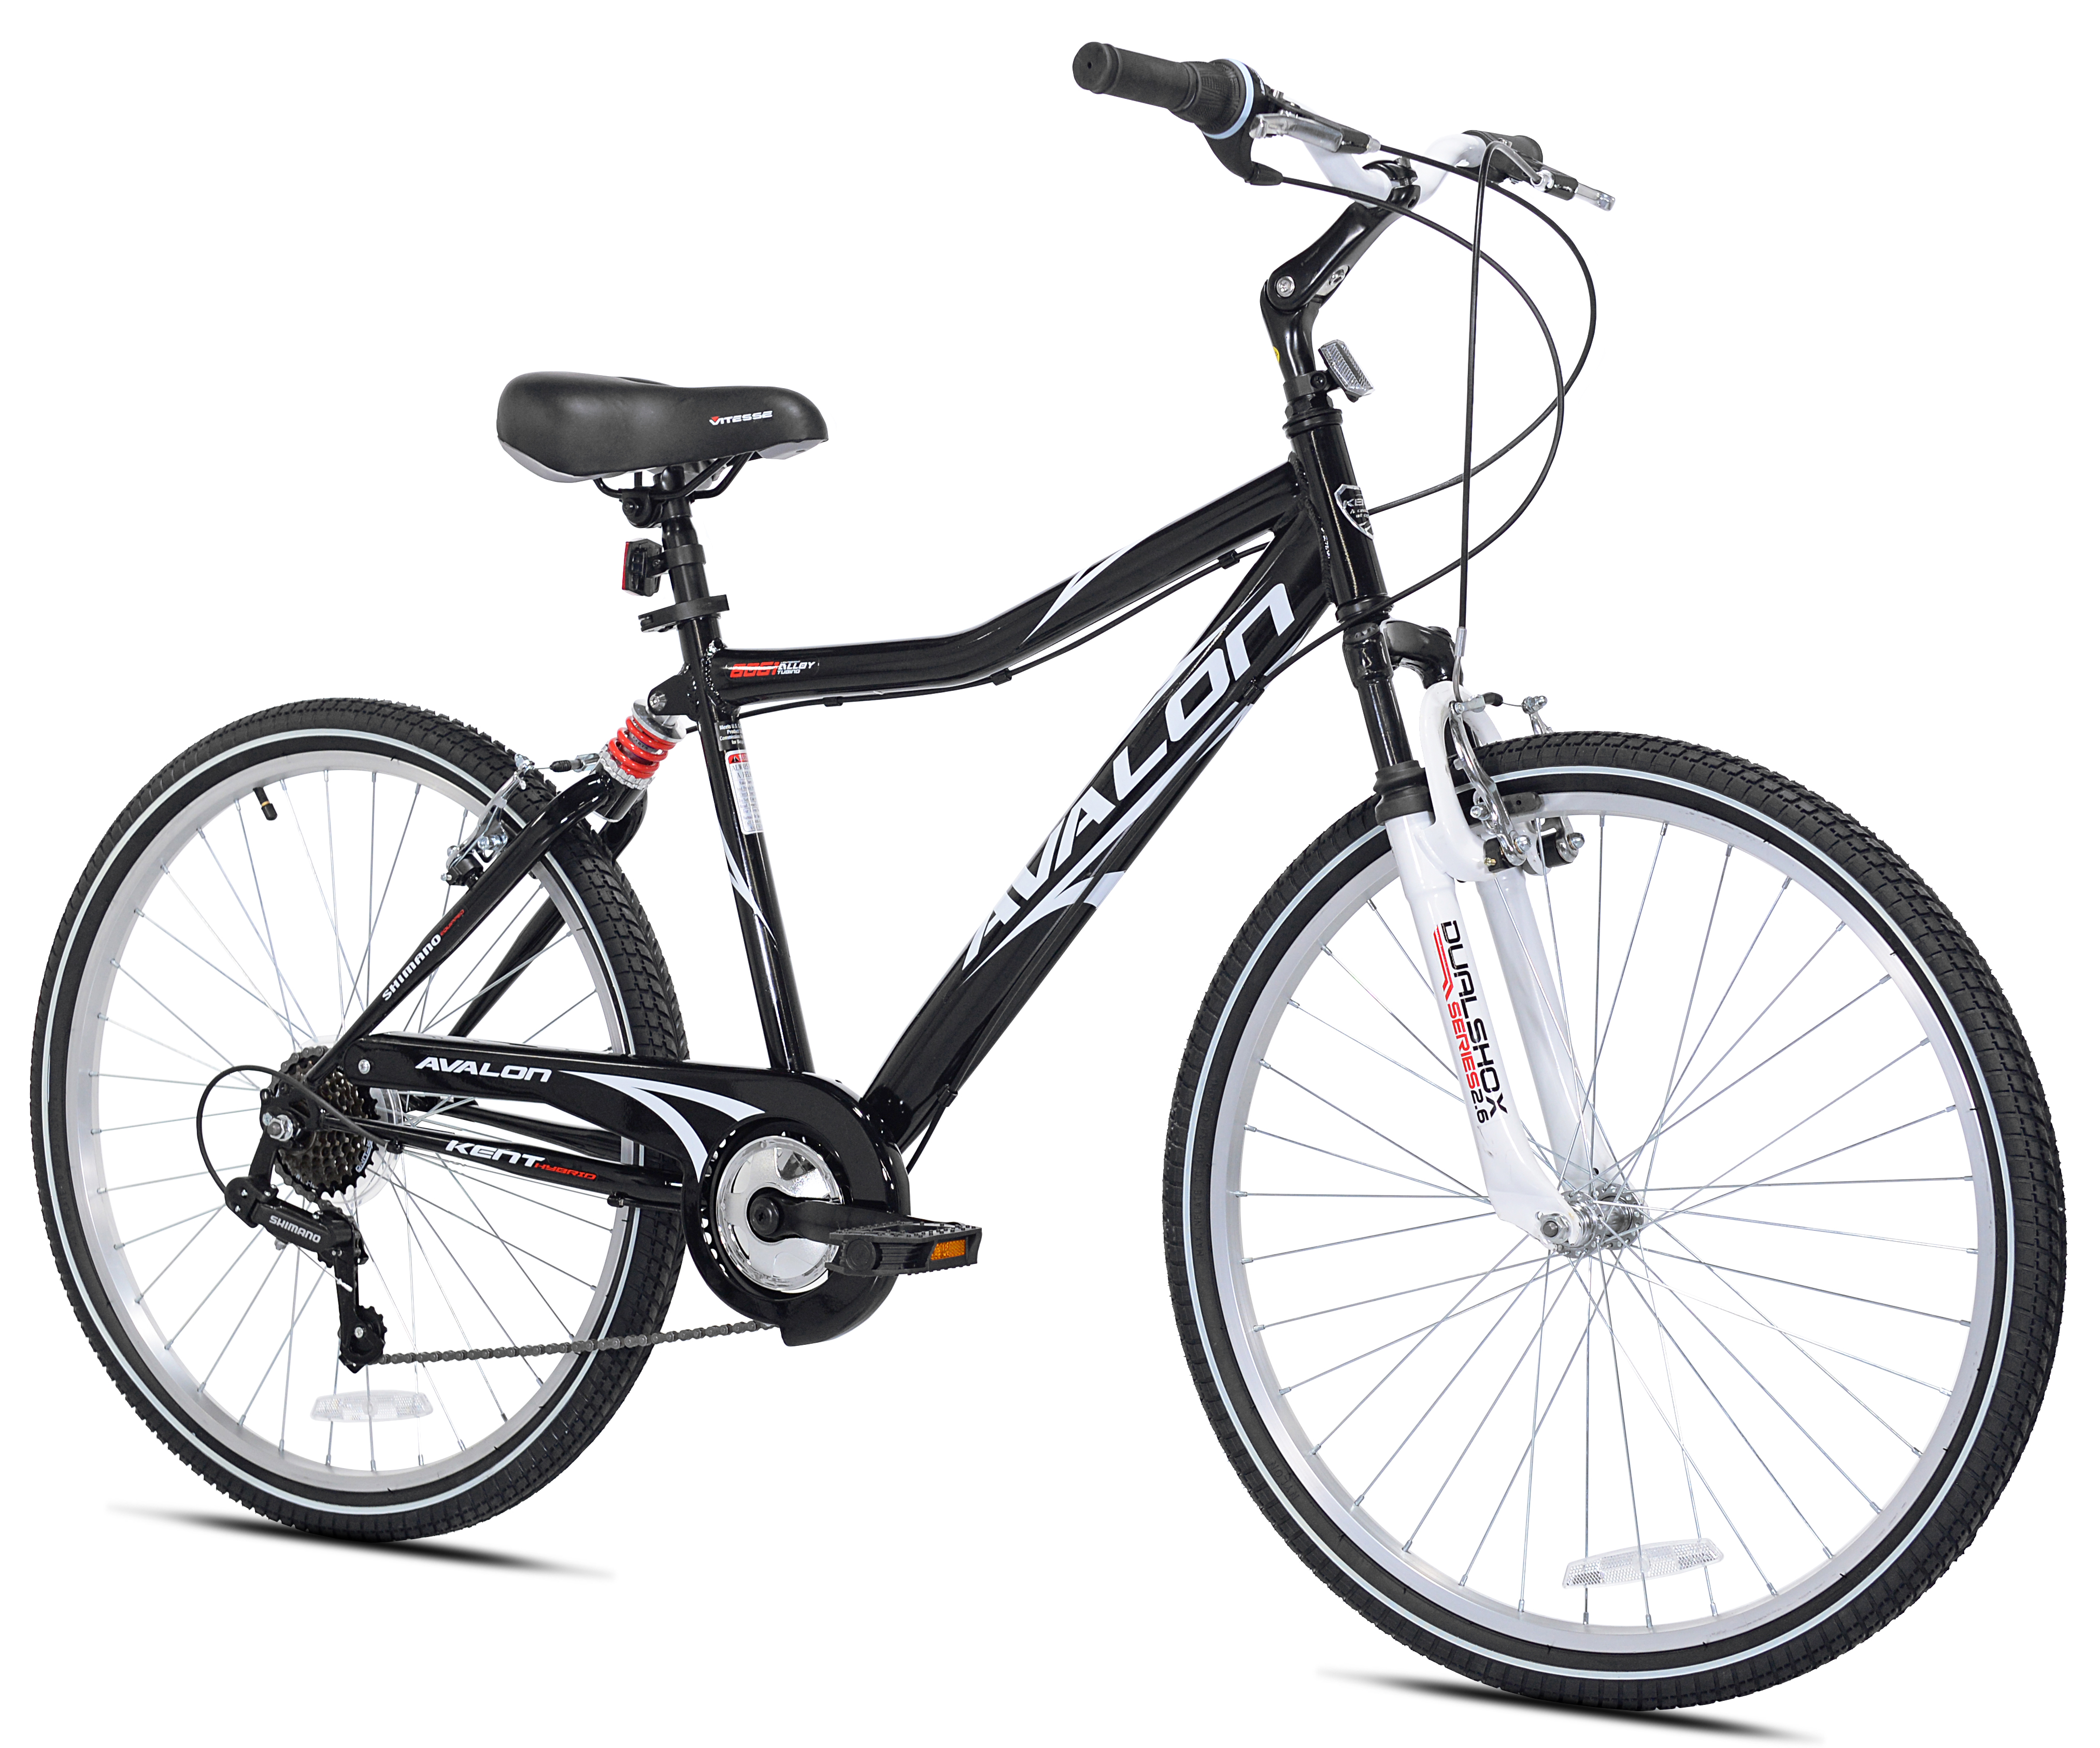 Kent Bicycle 26 In. Avalon Comfort Men's Bike with Full Suspension, Black - image 1 of 11